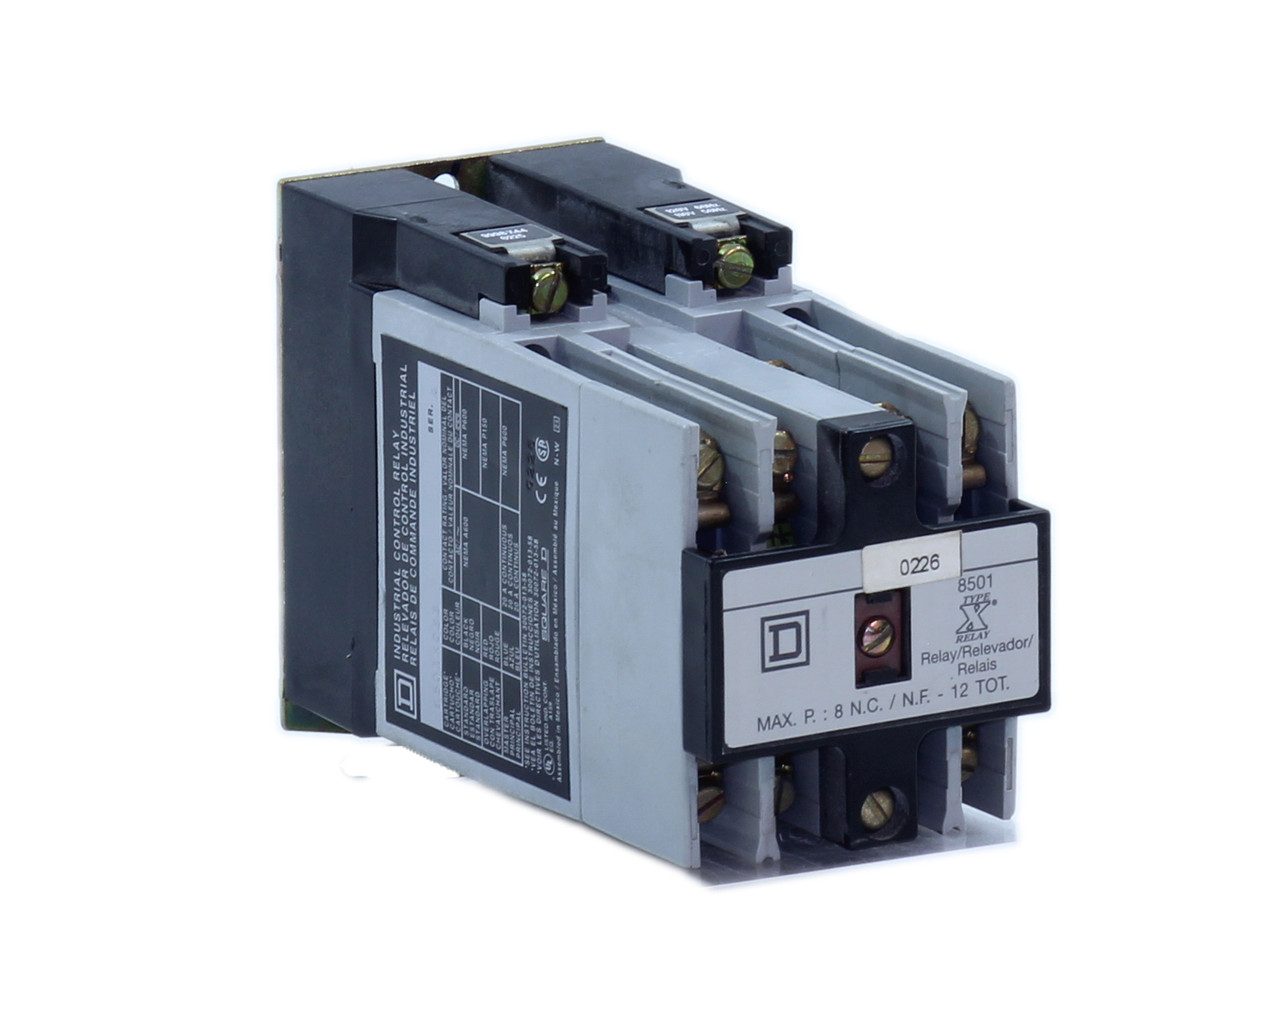 Square D 8501X033 Industrial Control Relay 110-120V 50/60Hz Series A